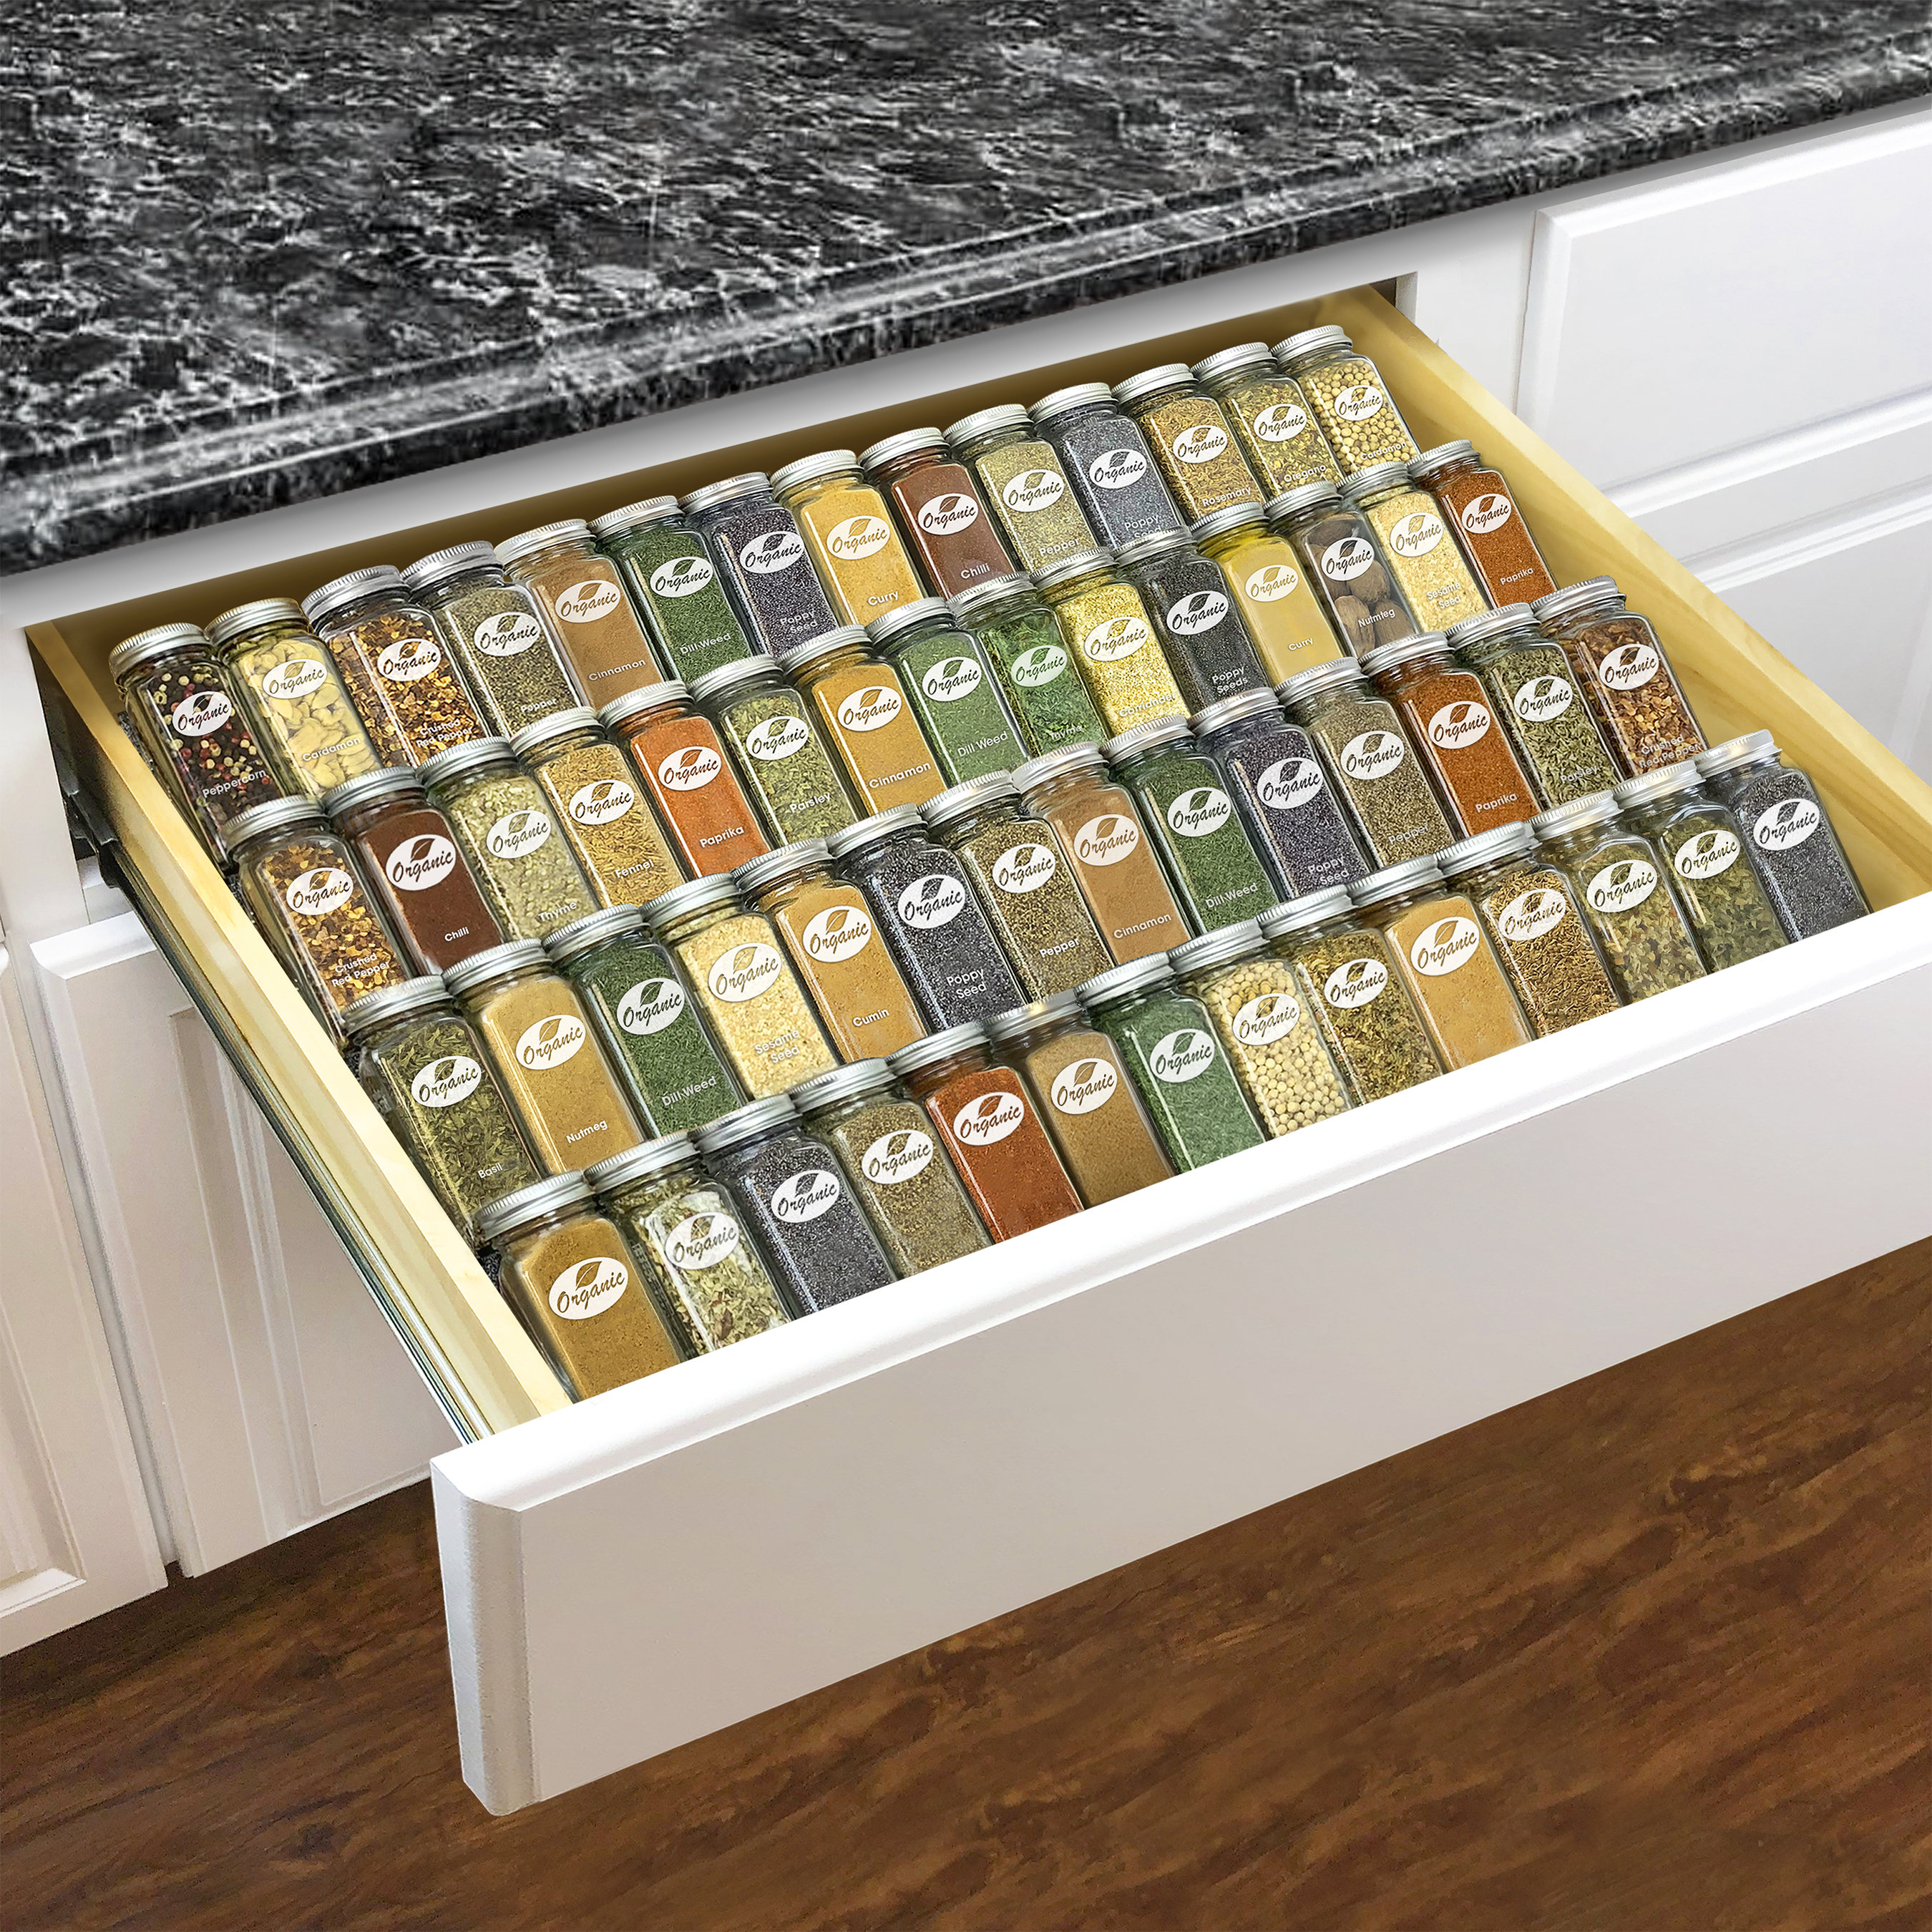 4 Tier Seasoning and Spice Rack, Plastic Spice Drawer Organizer for Kitchen  2pcs